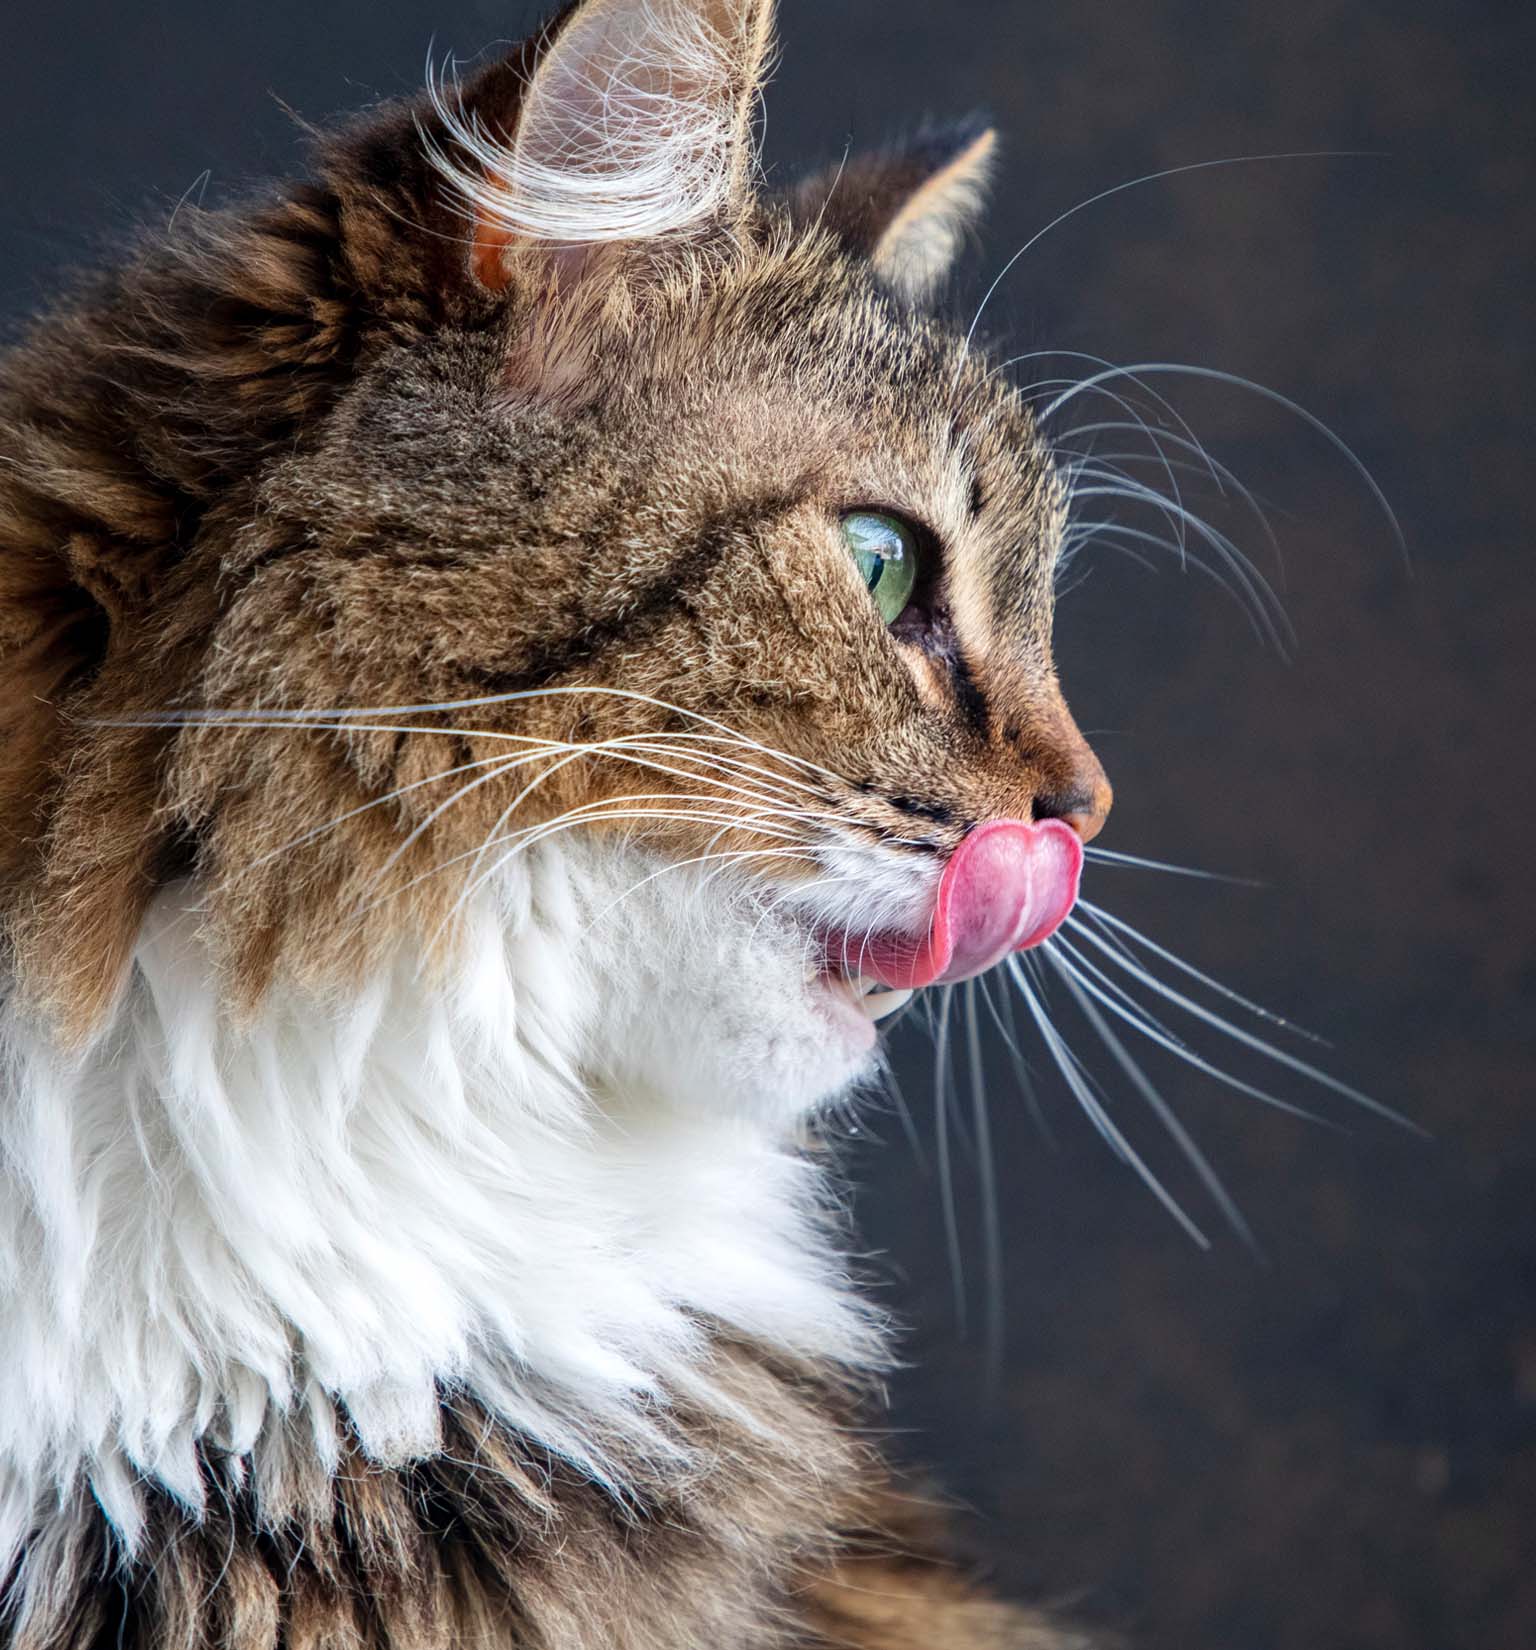 3 things to pay attention to when buying cat food